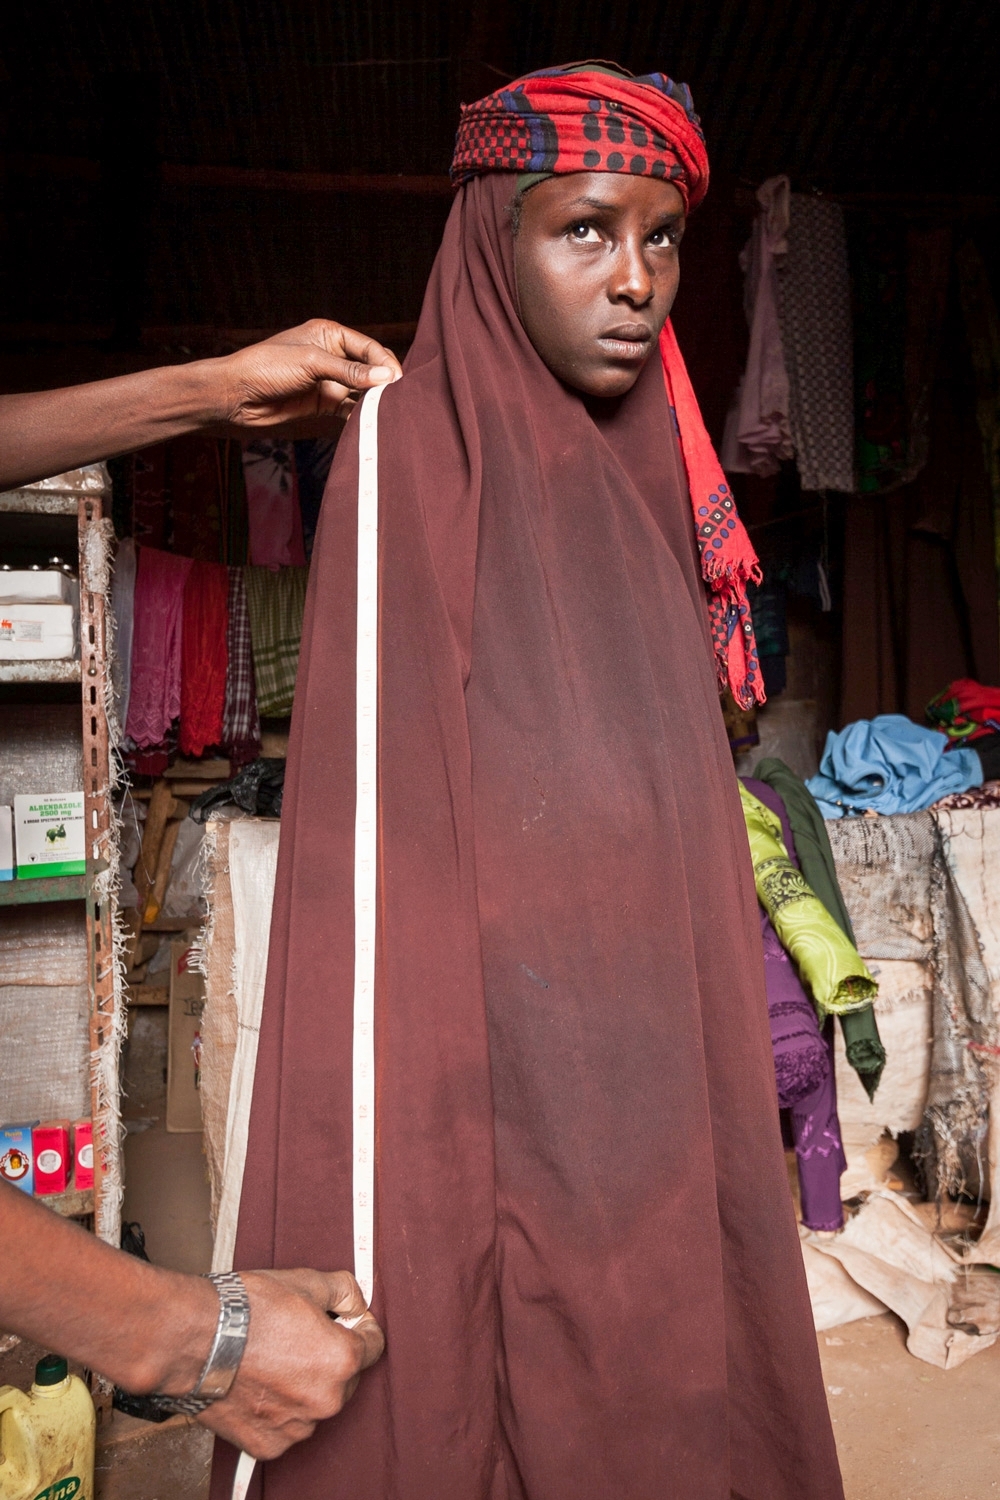  A tailor measures Habiba for new clothes in advance of her wedding; Ethiopia 